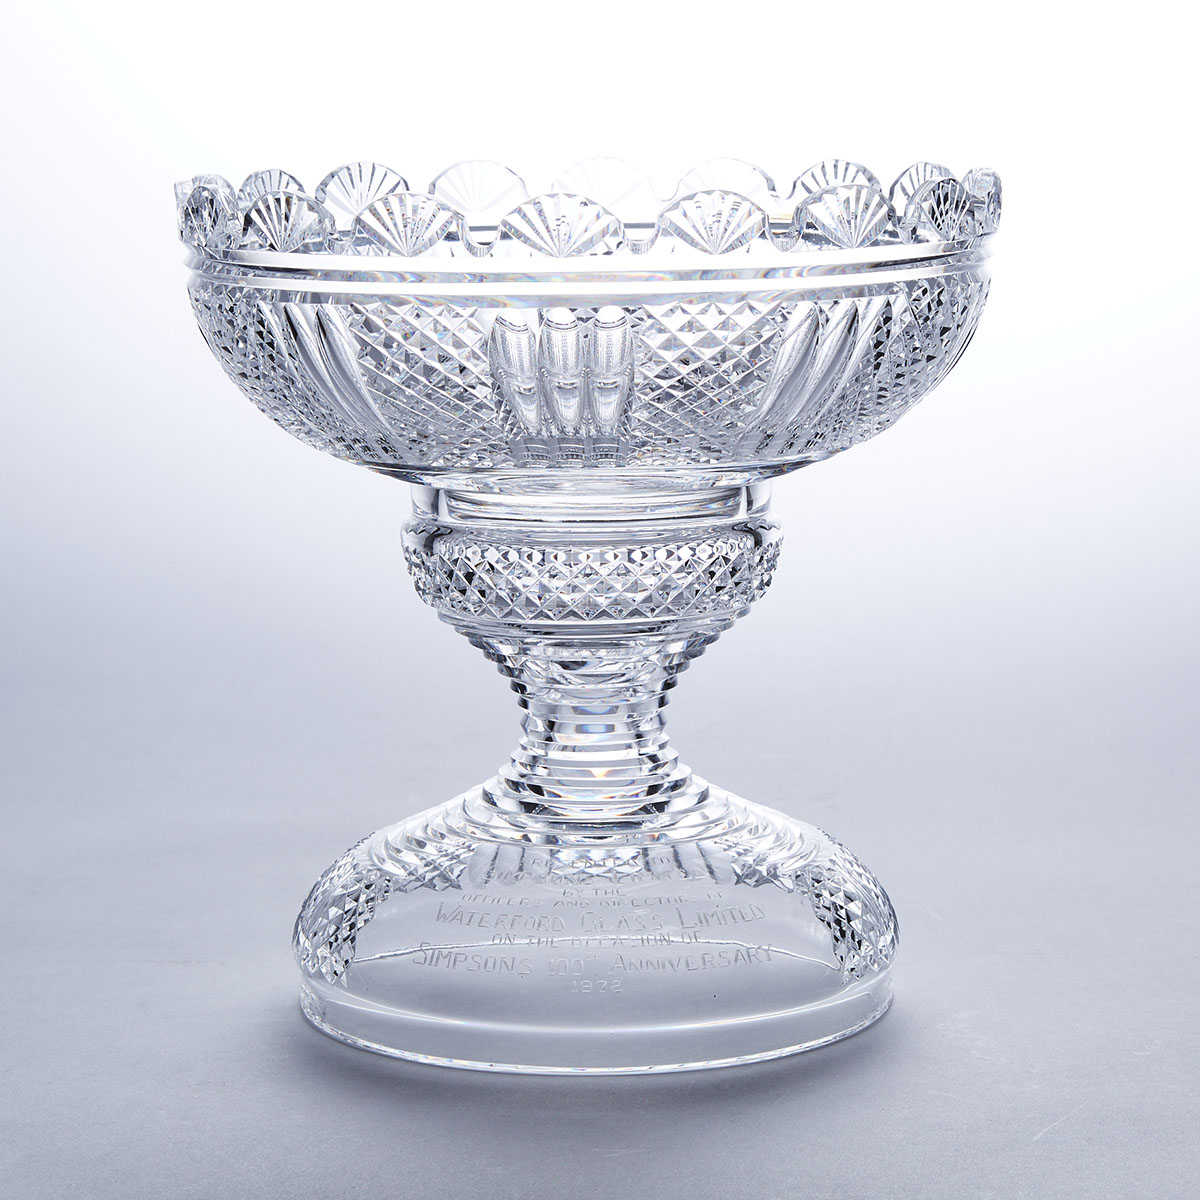 Waterford Presentation Cut Glass Bowl on Stand, c.1972